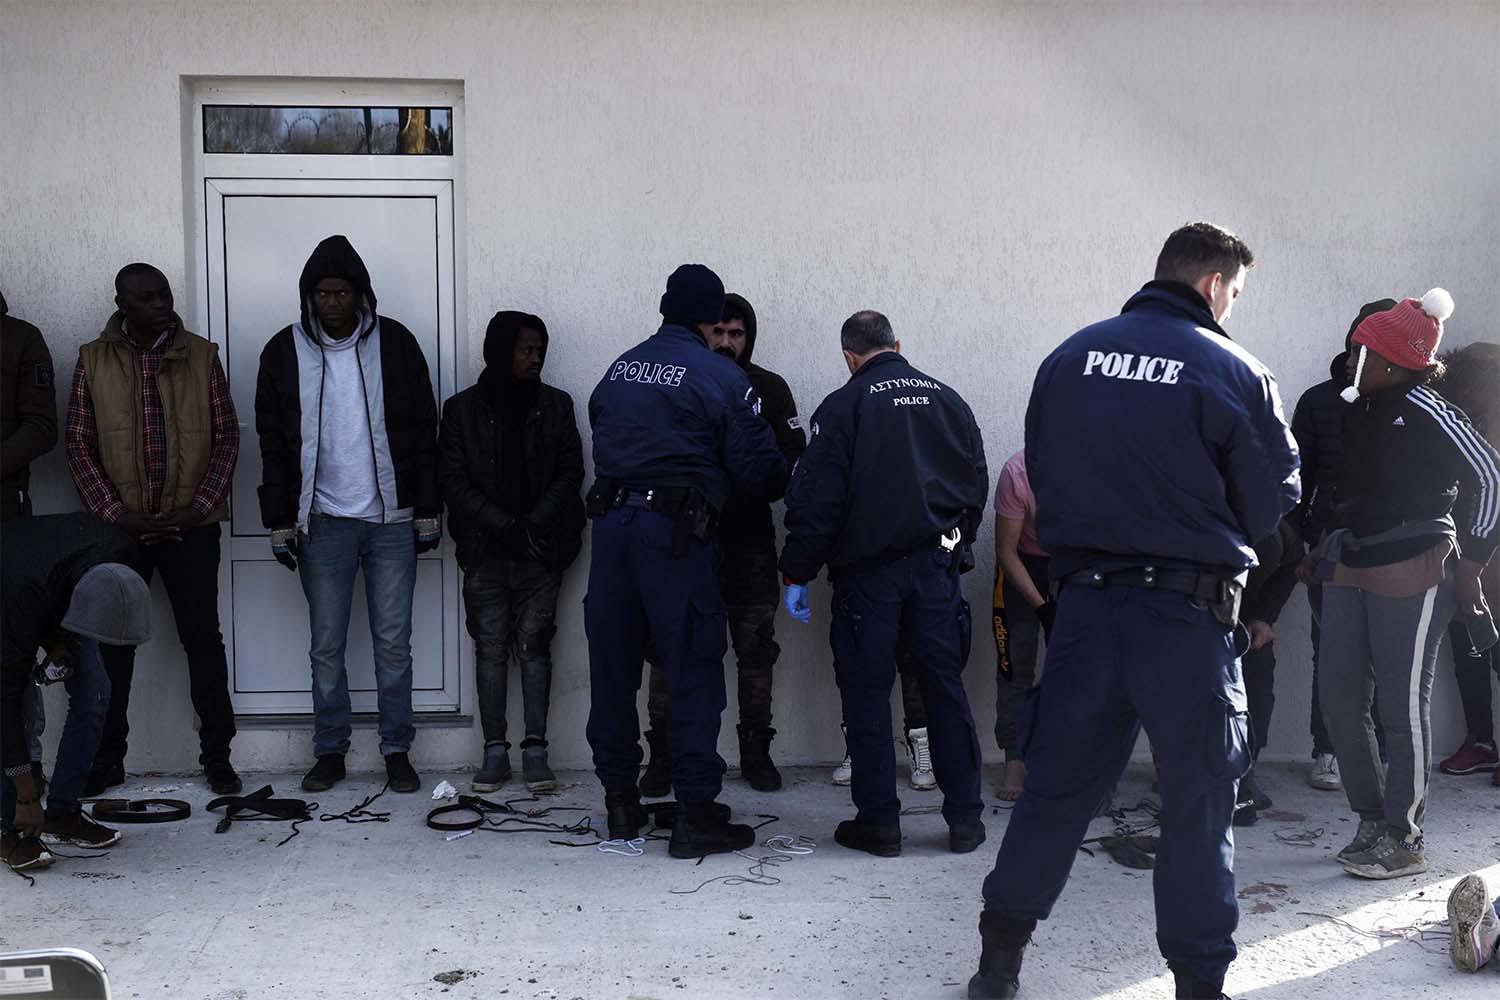 Greek policemen check detained migrants at a border police station in the village of Neo Cheimonio, Evros region